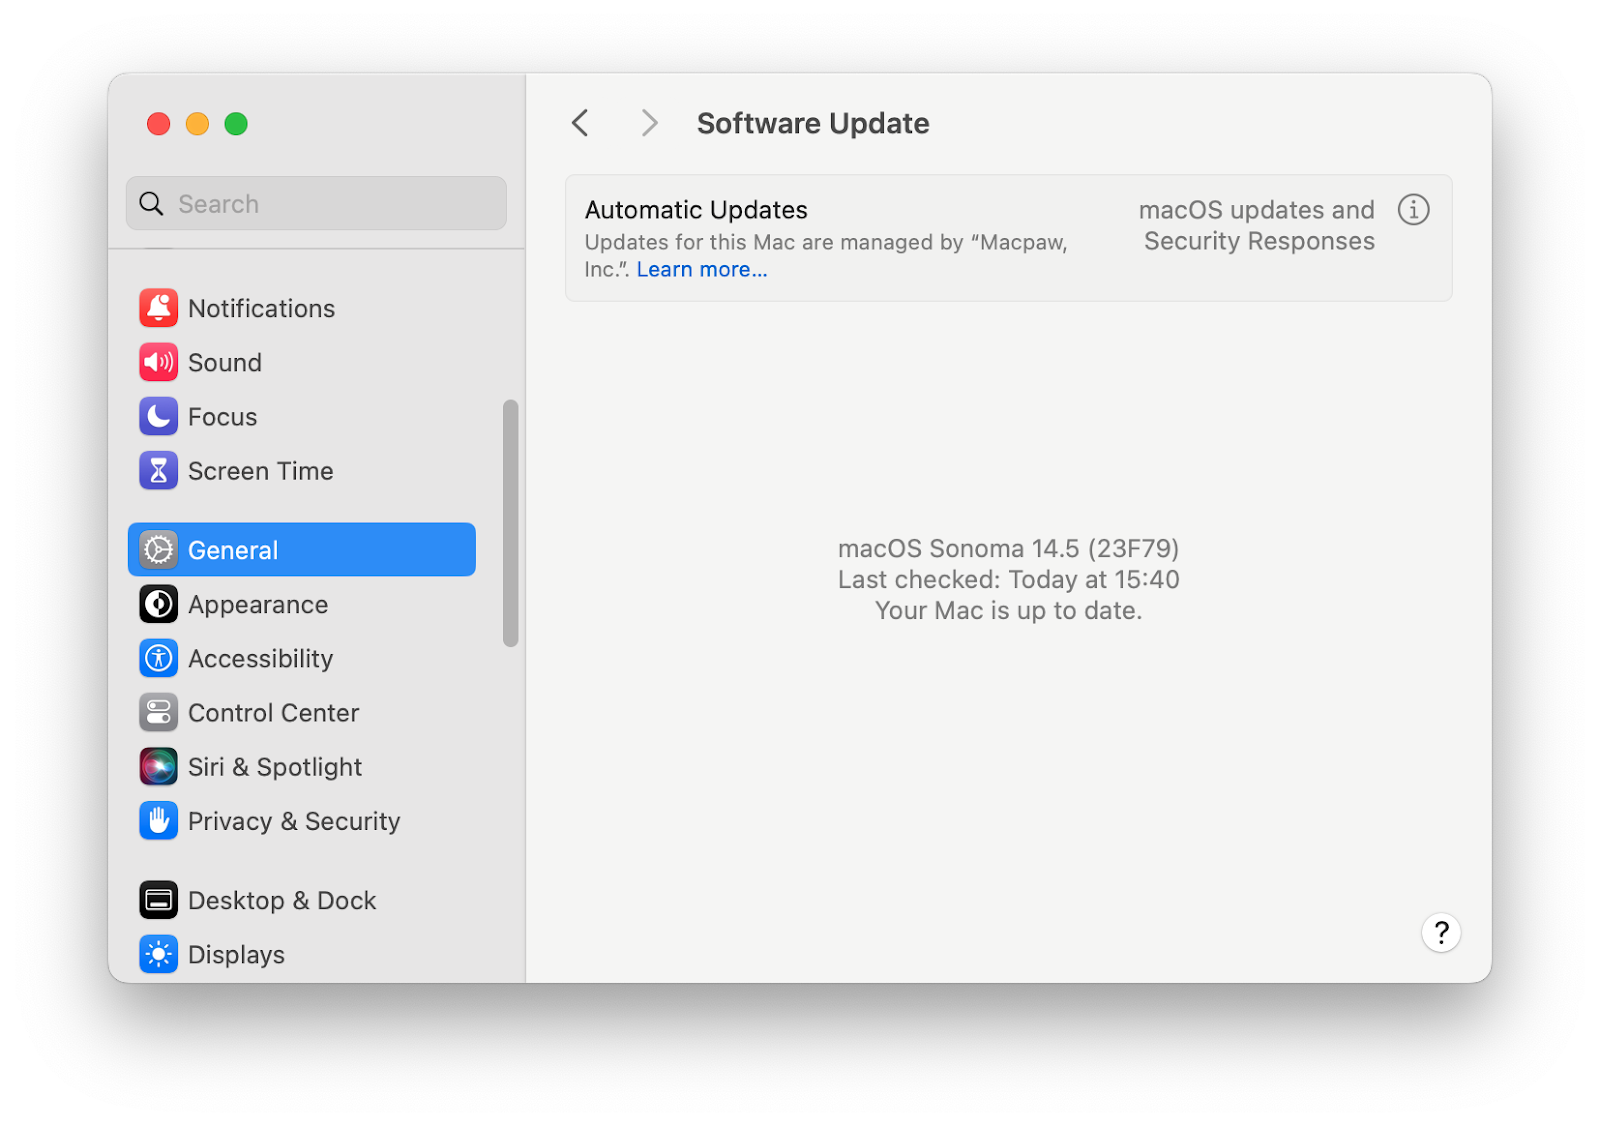 software update system settings